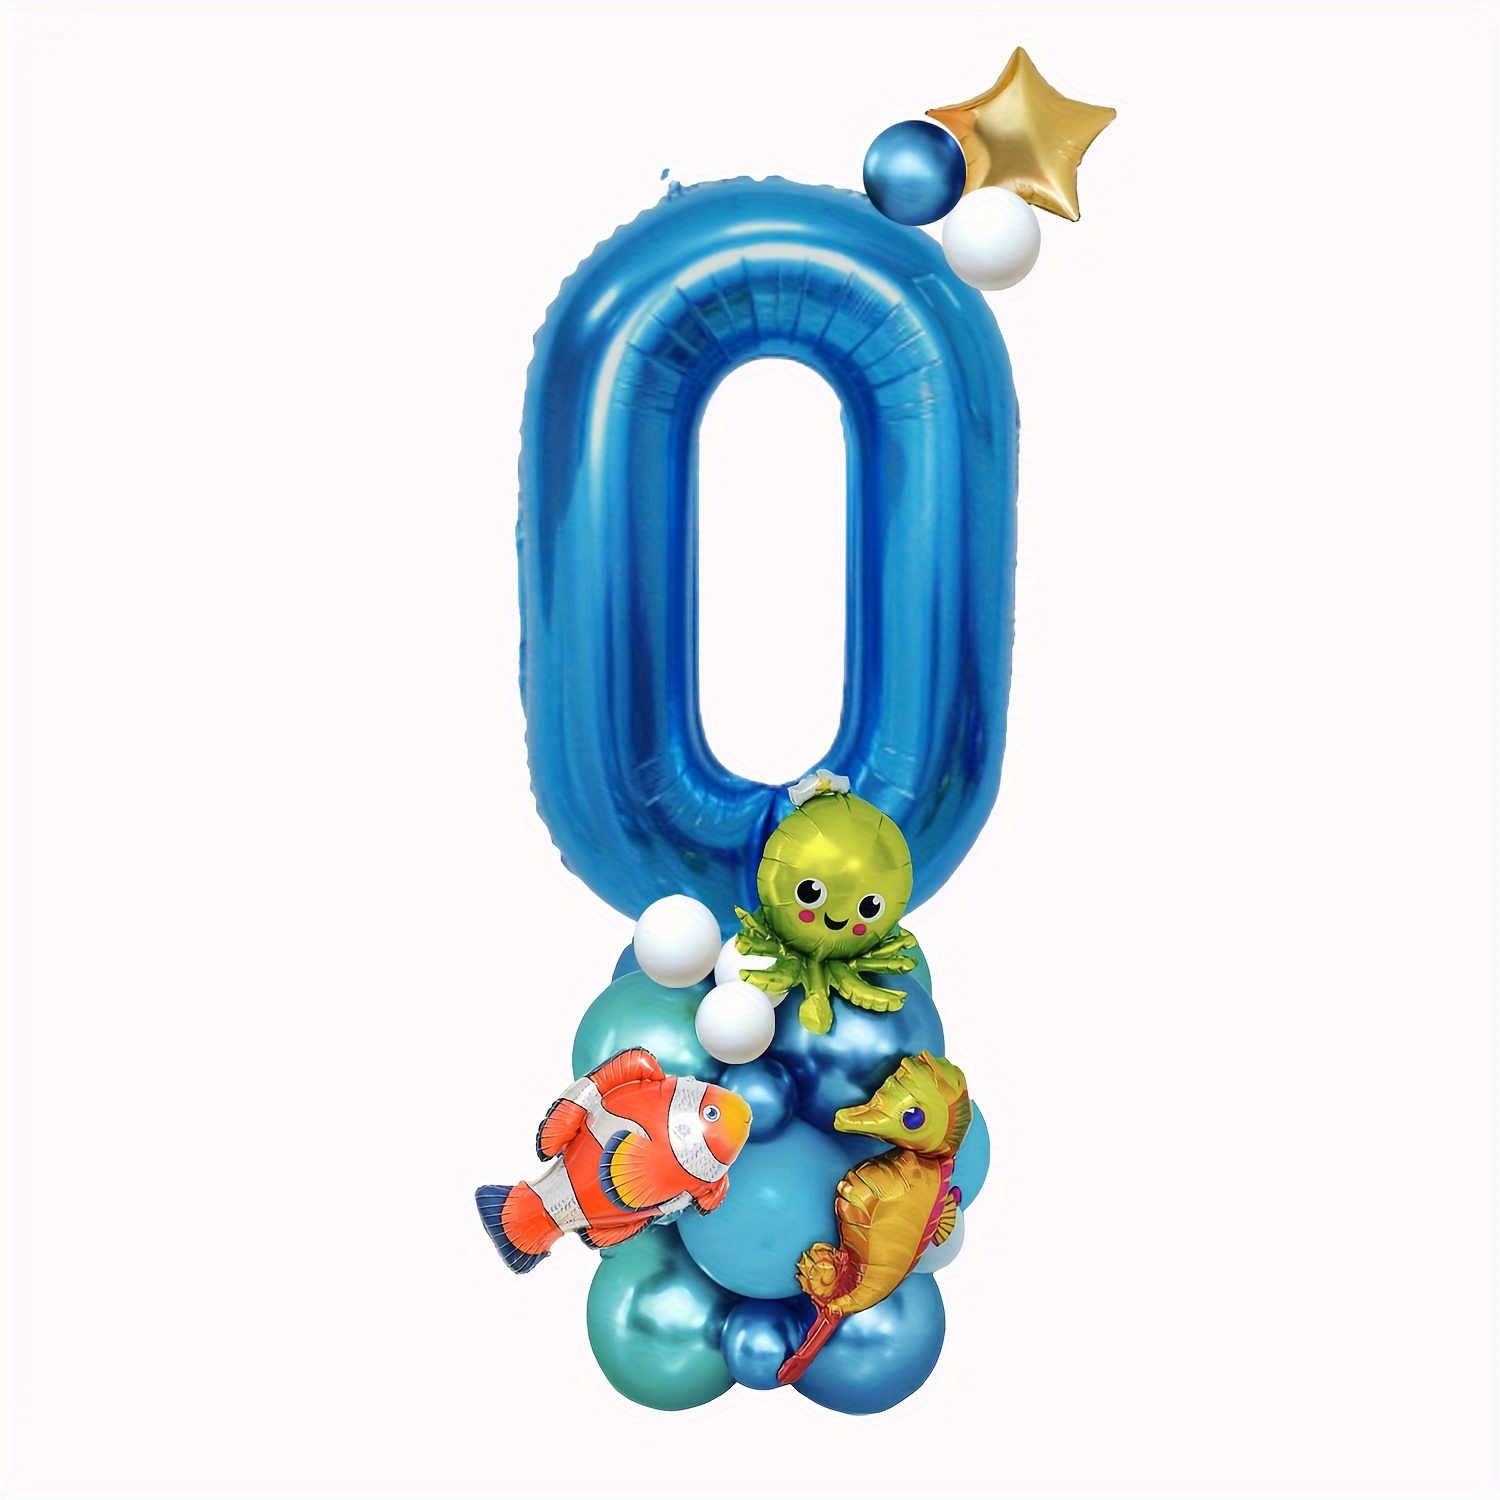 

Ocean-themed Party Balloon Set - 19pcs With Sea Animals, Fish, Seahorse & Octopus Foil Balloons For Birthdays, Weddings & Showers